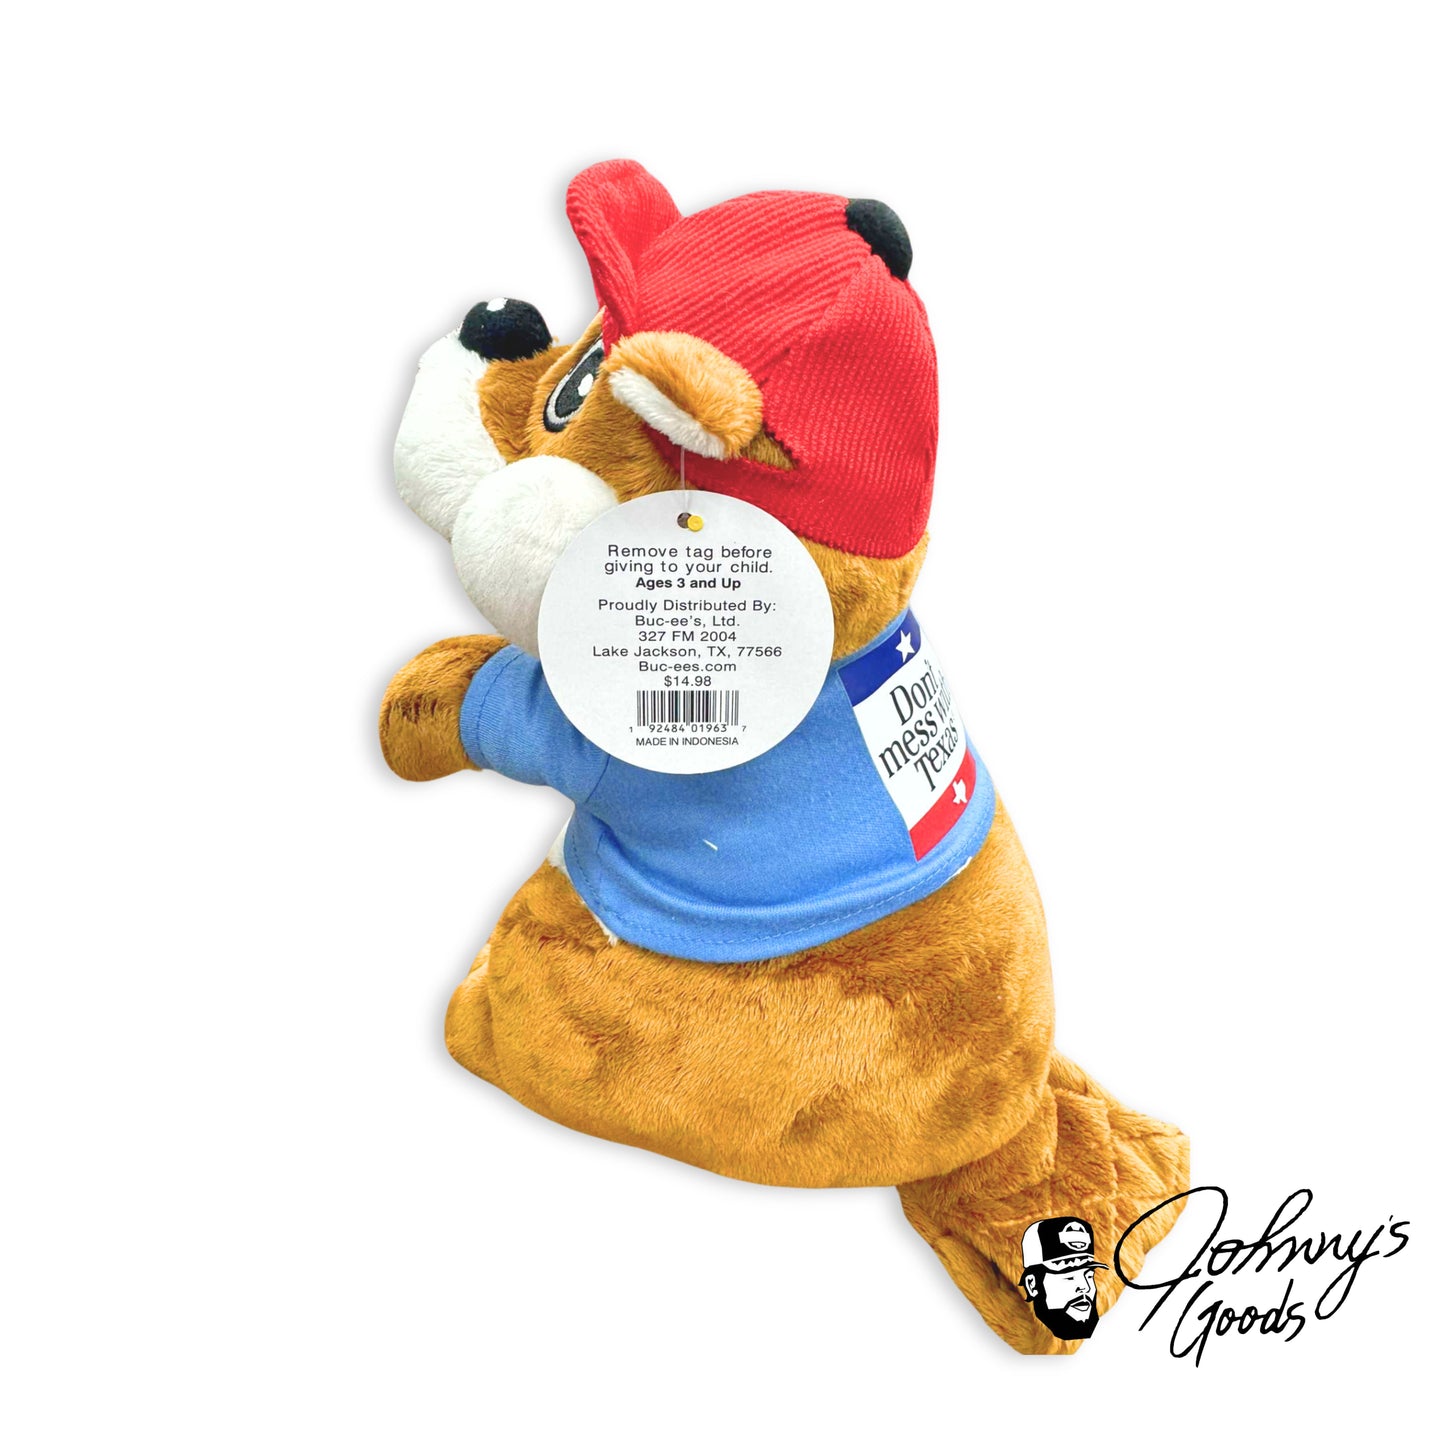 Buc-ee's Beaver Don't Mess with Texas Blue Shirt Stuffed Toy Plush buc ees buc ee's bucees buccees buc-ees